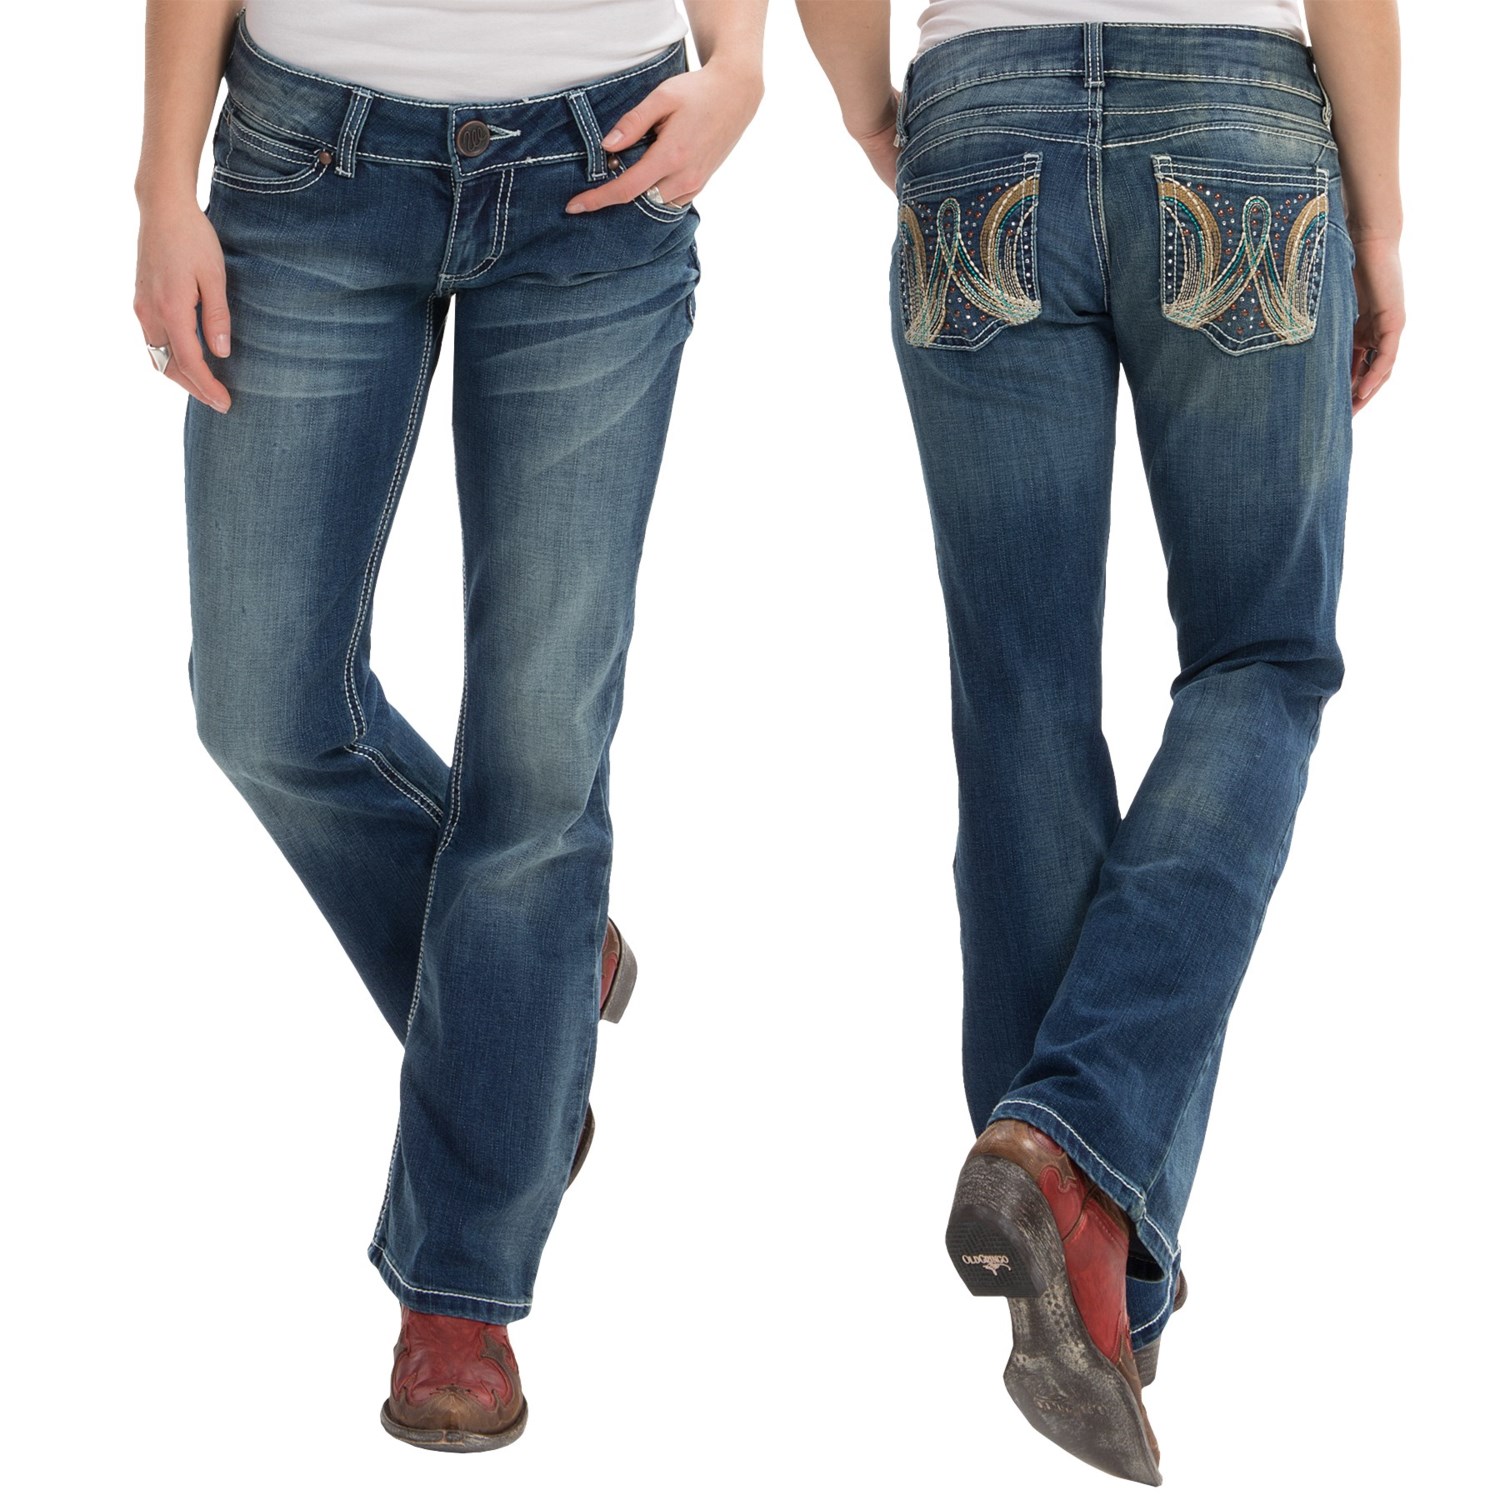 Wrangler Ultra Low-Rise Patch Jeans (For Women) - Save 50%